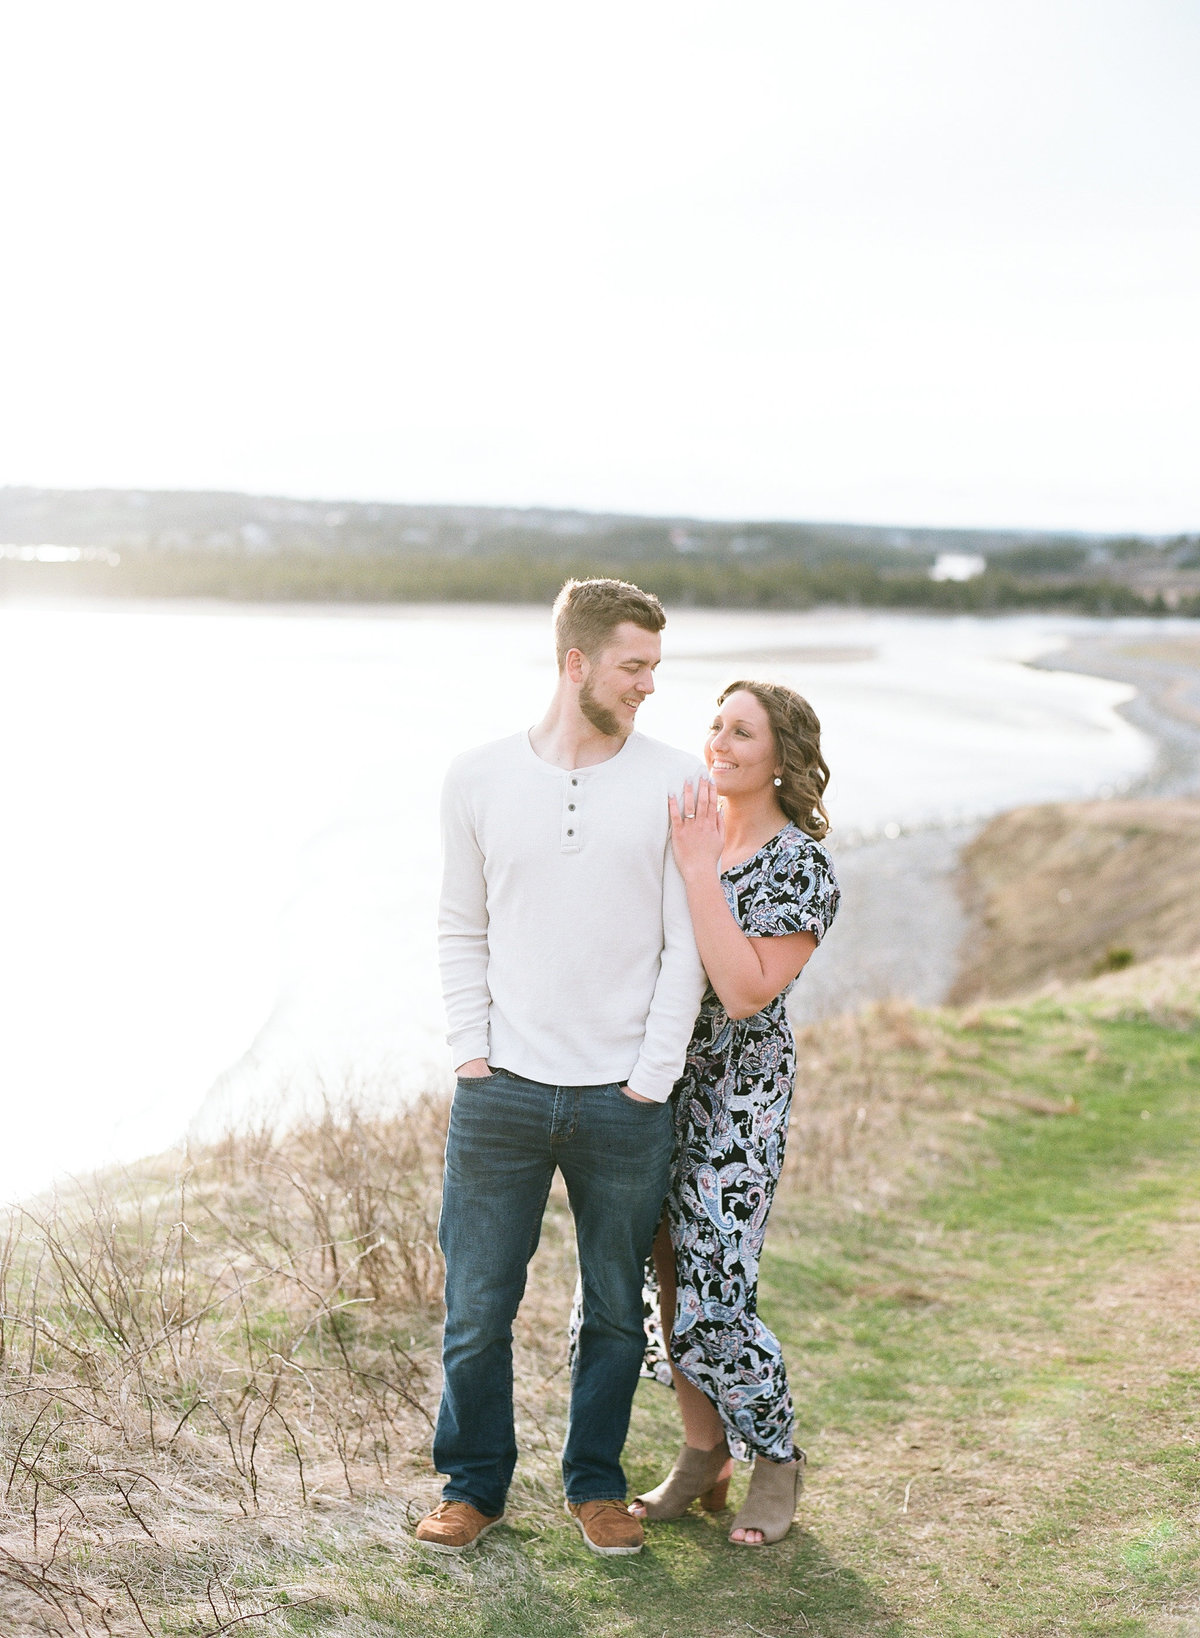 Jacqueline Anne Photography - Akayla and Andrew - Lawrencetown Beach-32